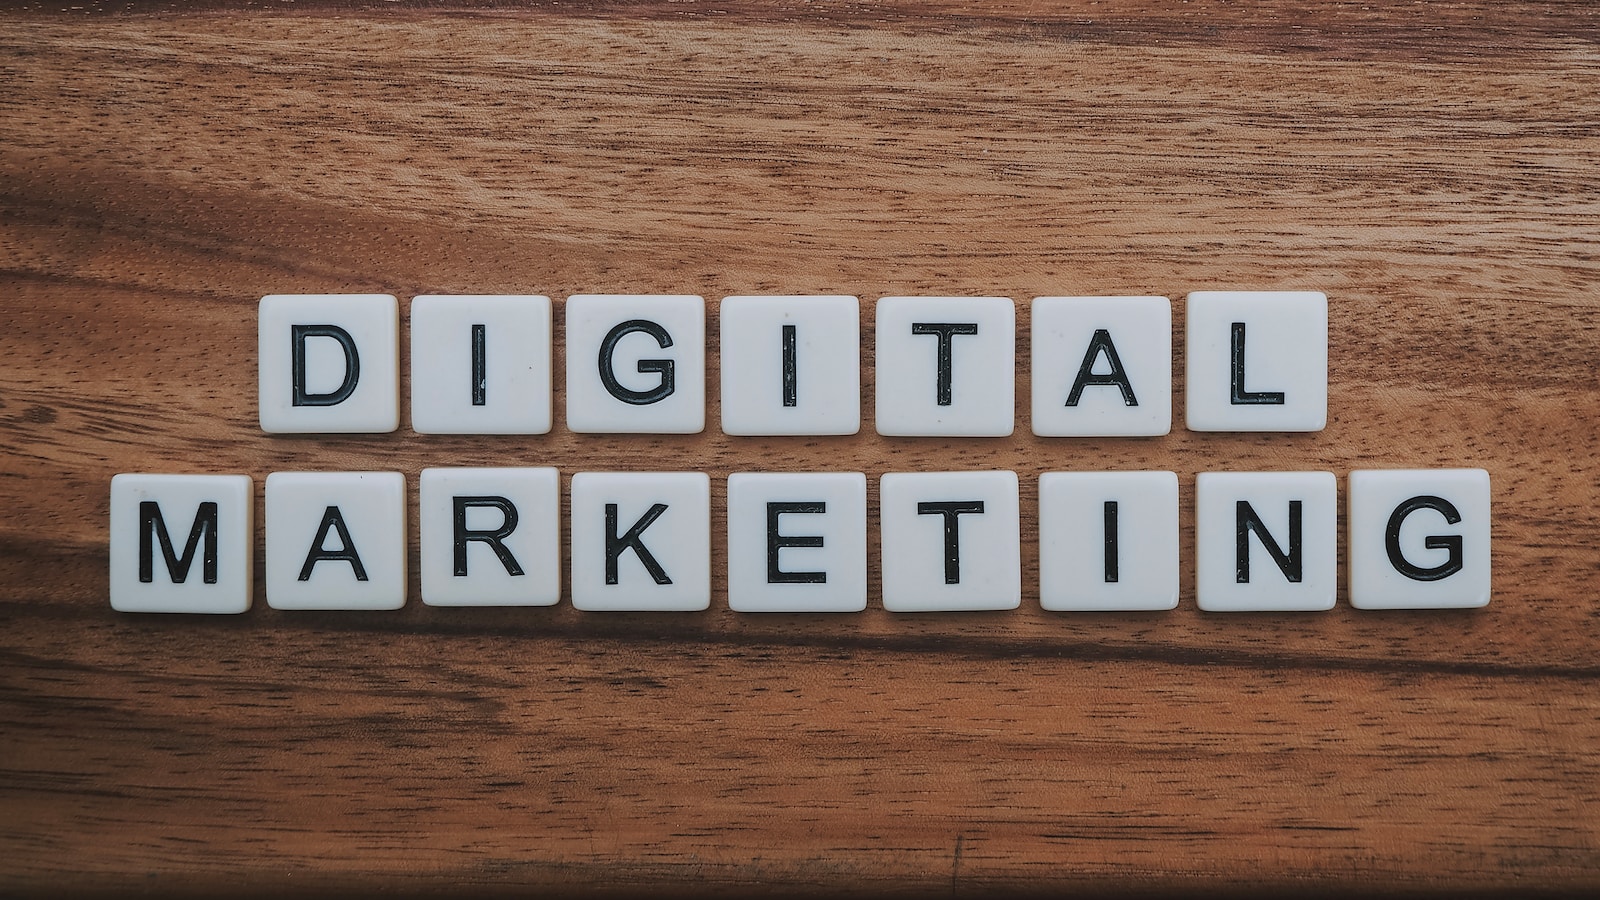 Learn about the different types of digital marketing